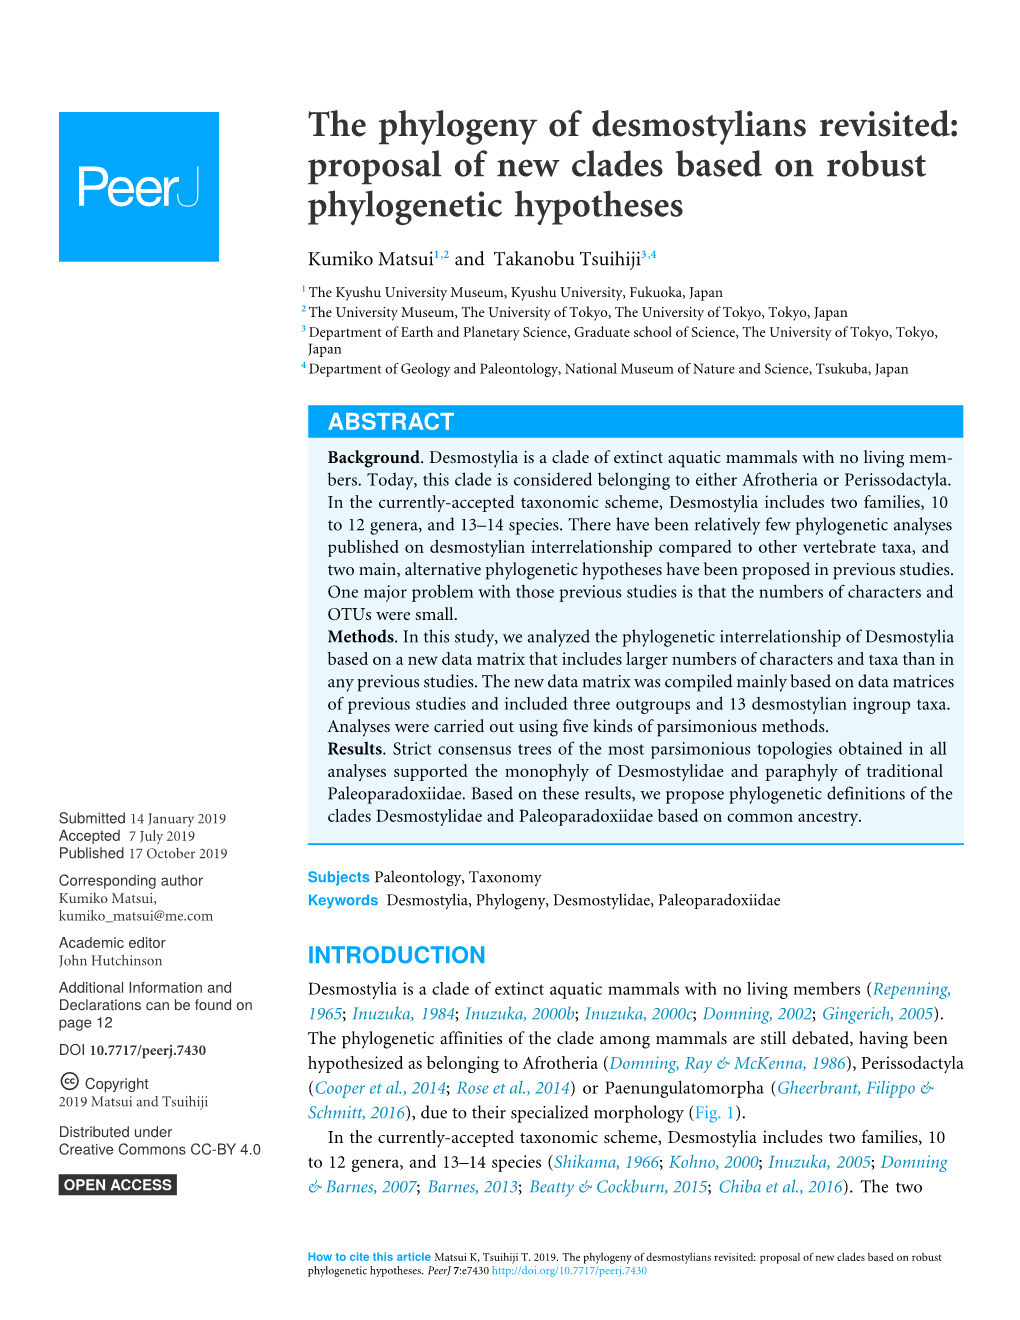 Proposal of New Clades Based on Robust Phylogenetic Hypotheses